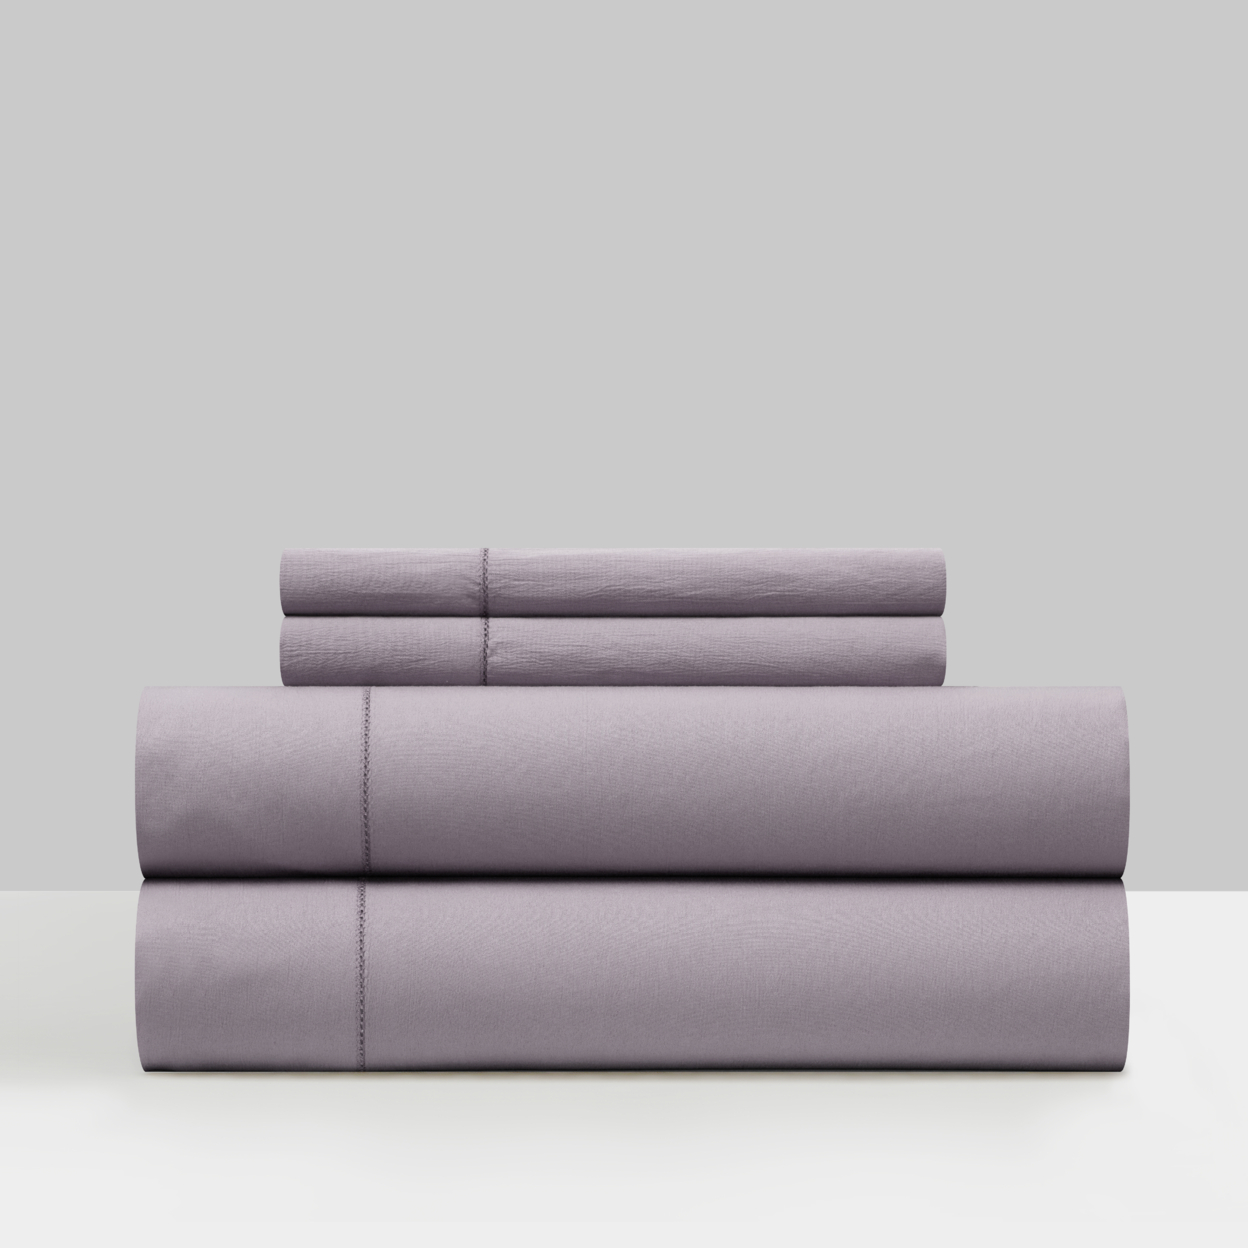 Daisy 3 Or 4 Piece Sheet Set Solid Color Washed Garment Technique - Lavender, Queen